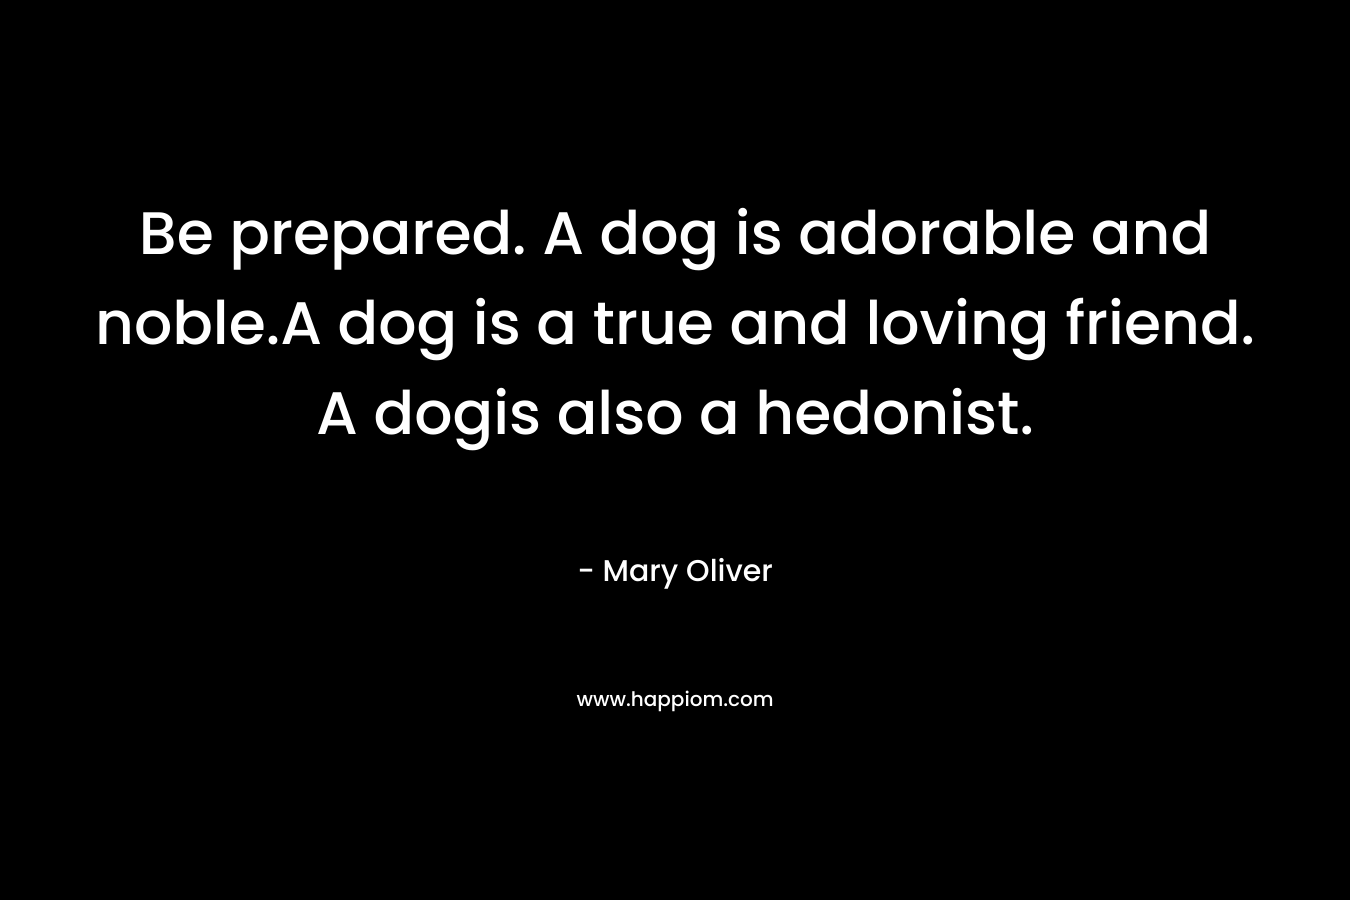 Be prepared. A dog is adorable and noble.A dog is a true and loving friend. A dogis also a hedonist. – Mary Oliver